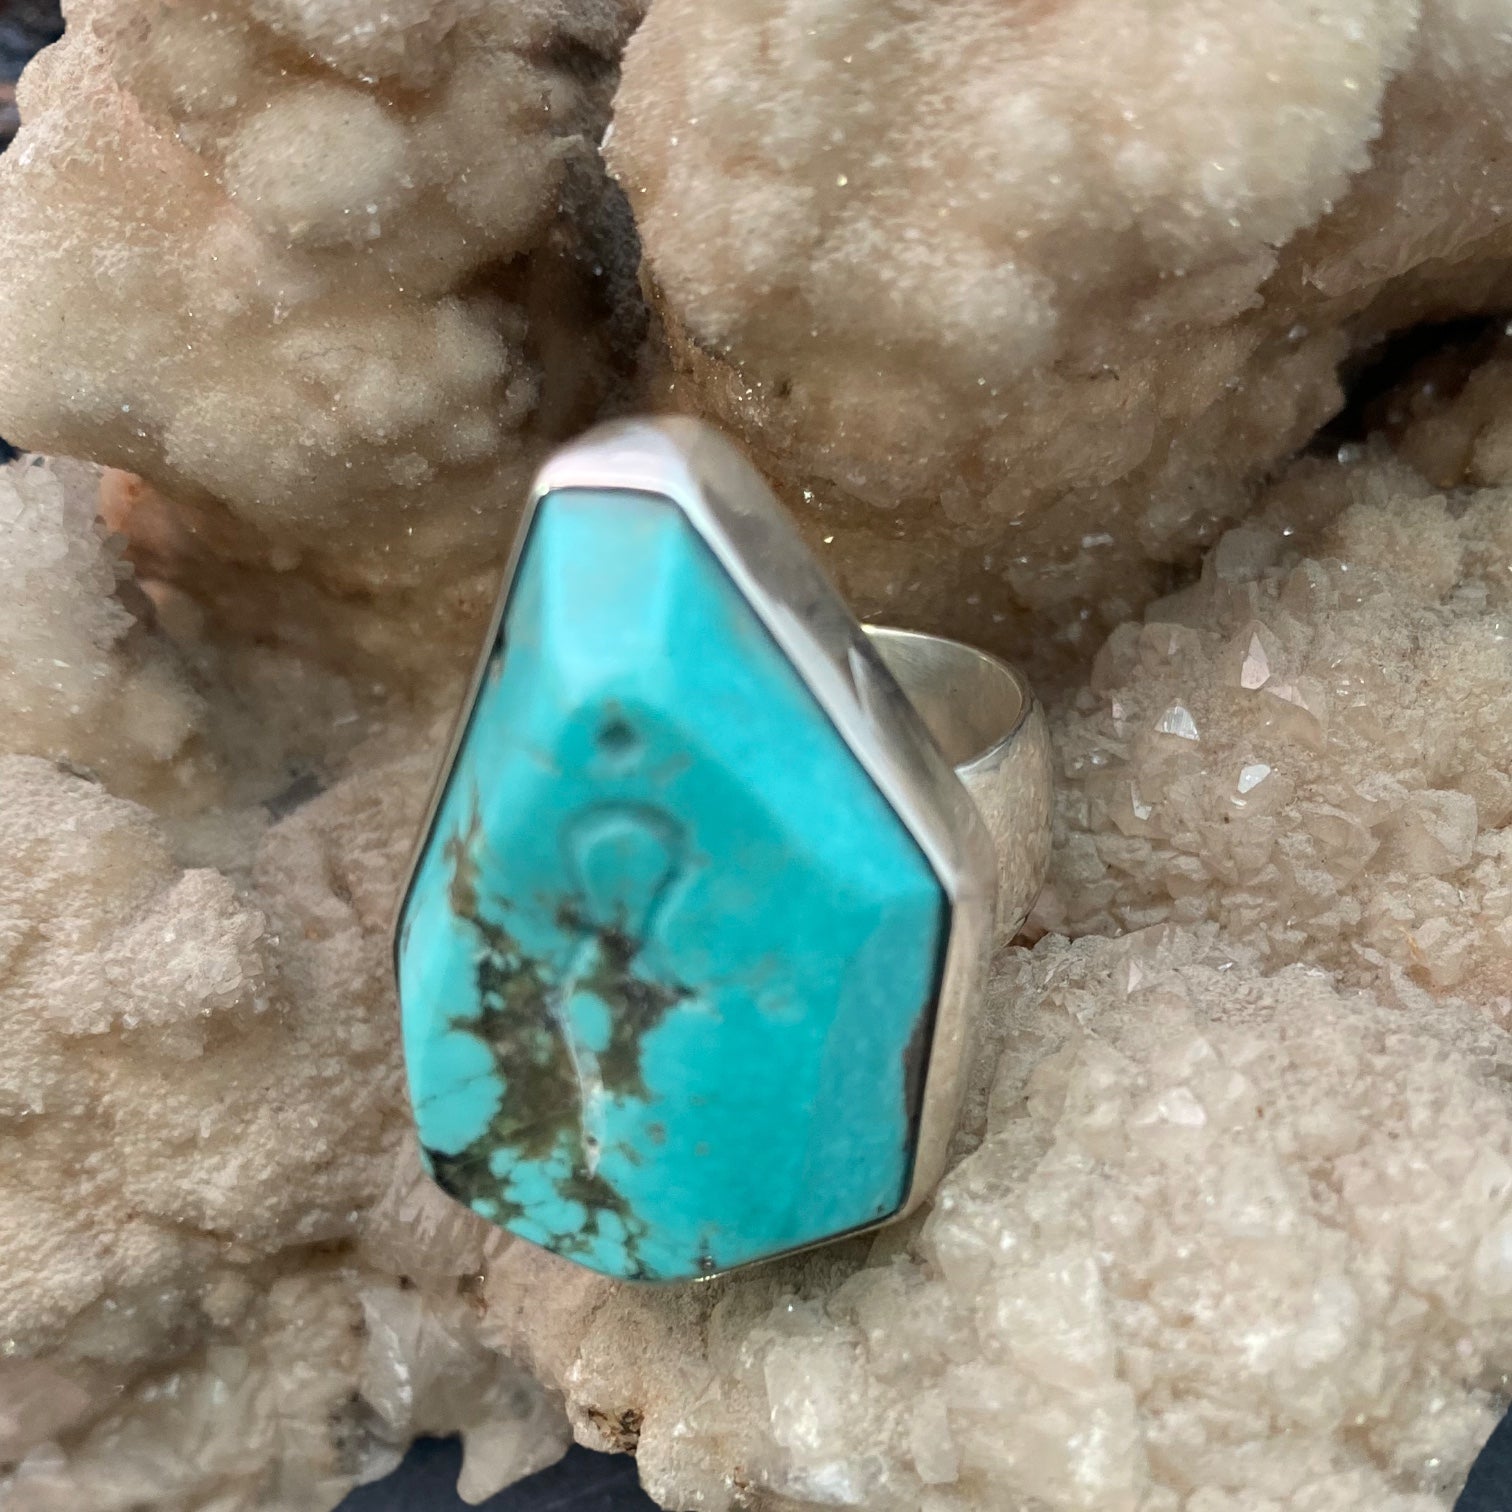 Arizona Turquoise Sterling Silver Ring with Divine Feminine Symbol